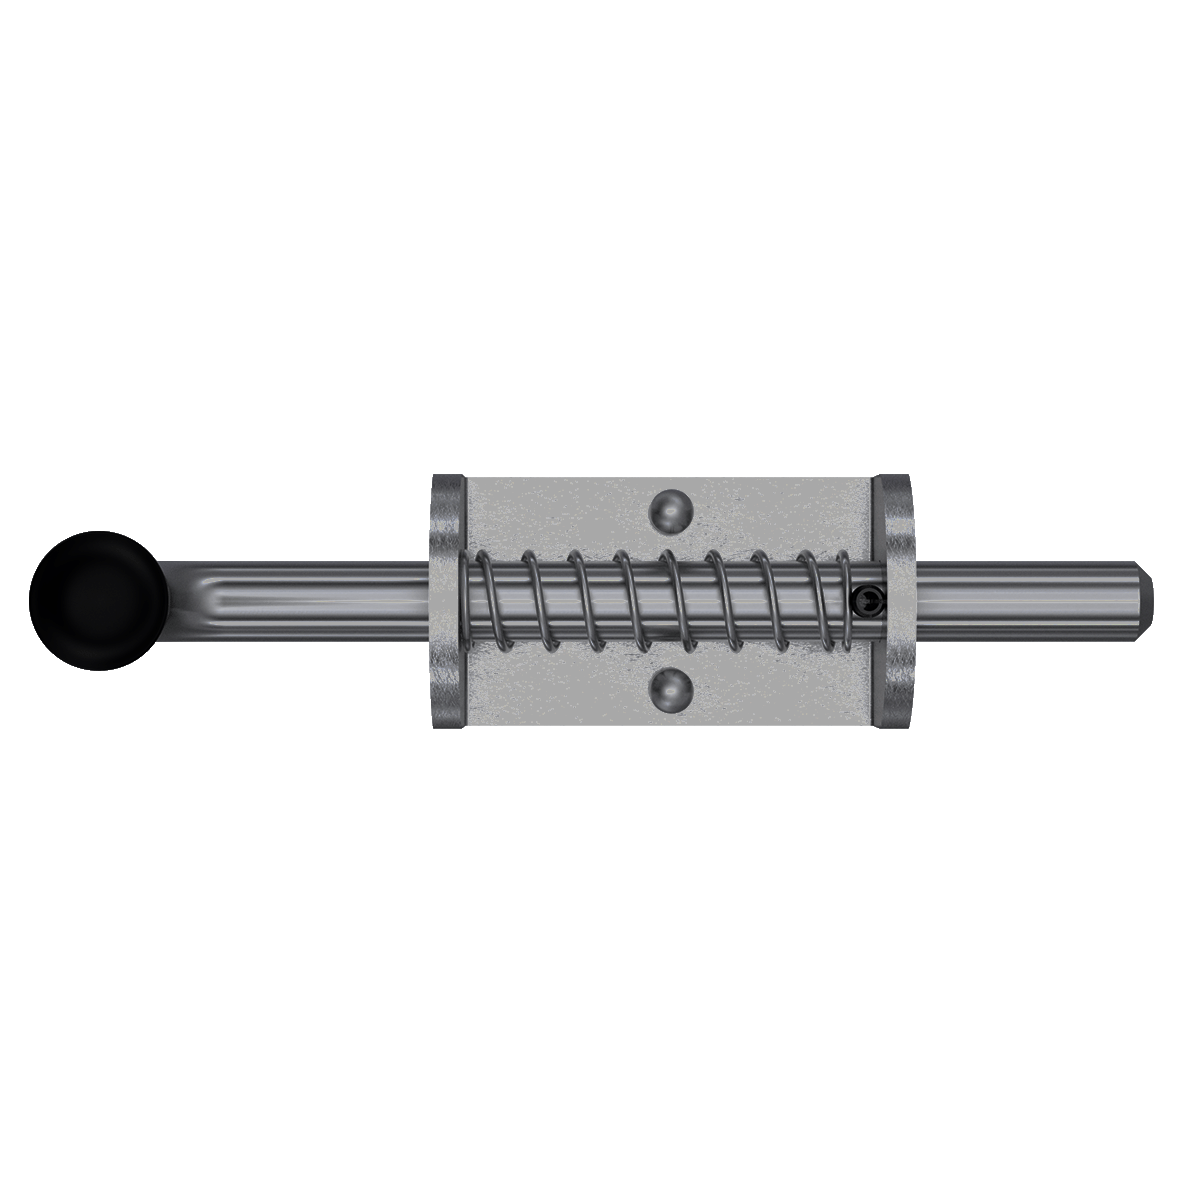 Aluminum base Spring Bolt with a stainless steel rod. Shown from top perspective with rod in closed position.